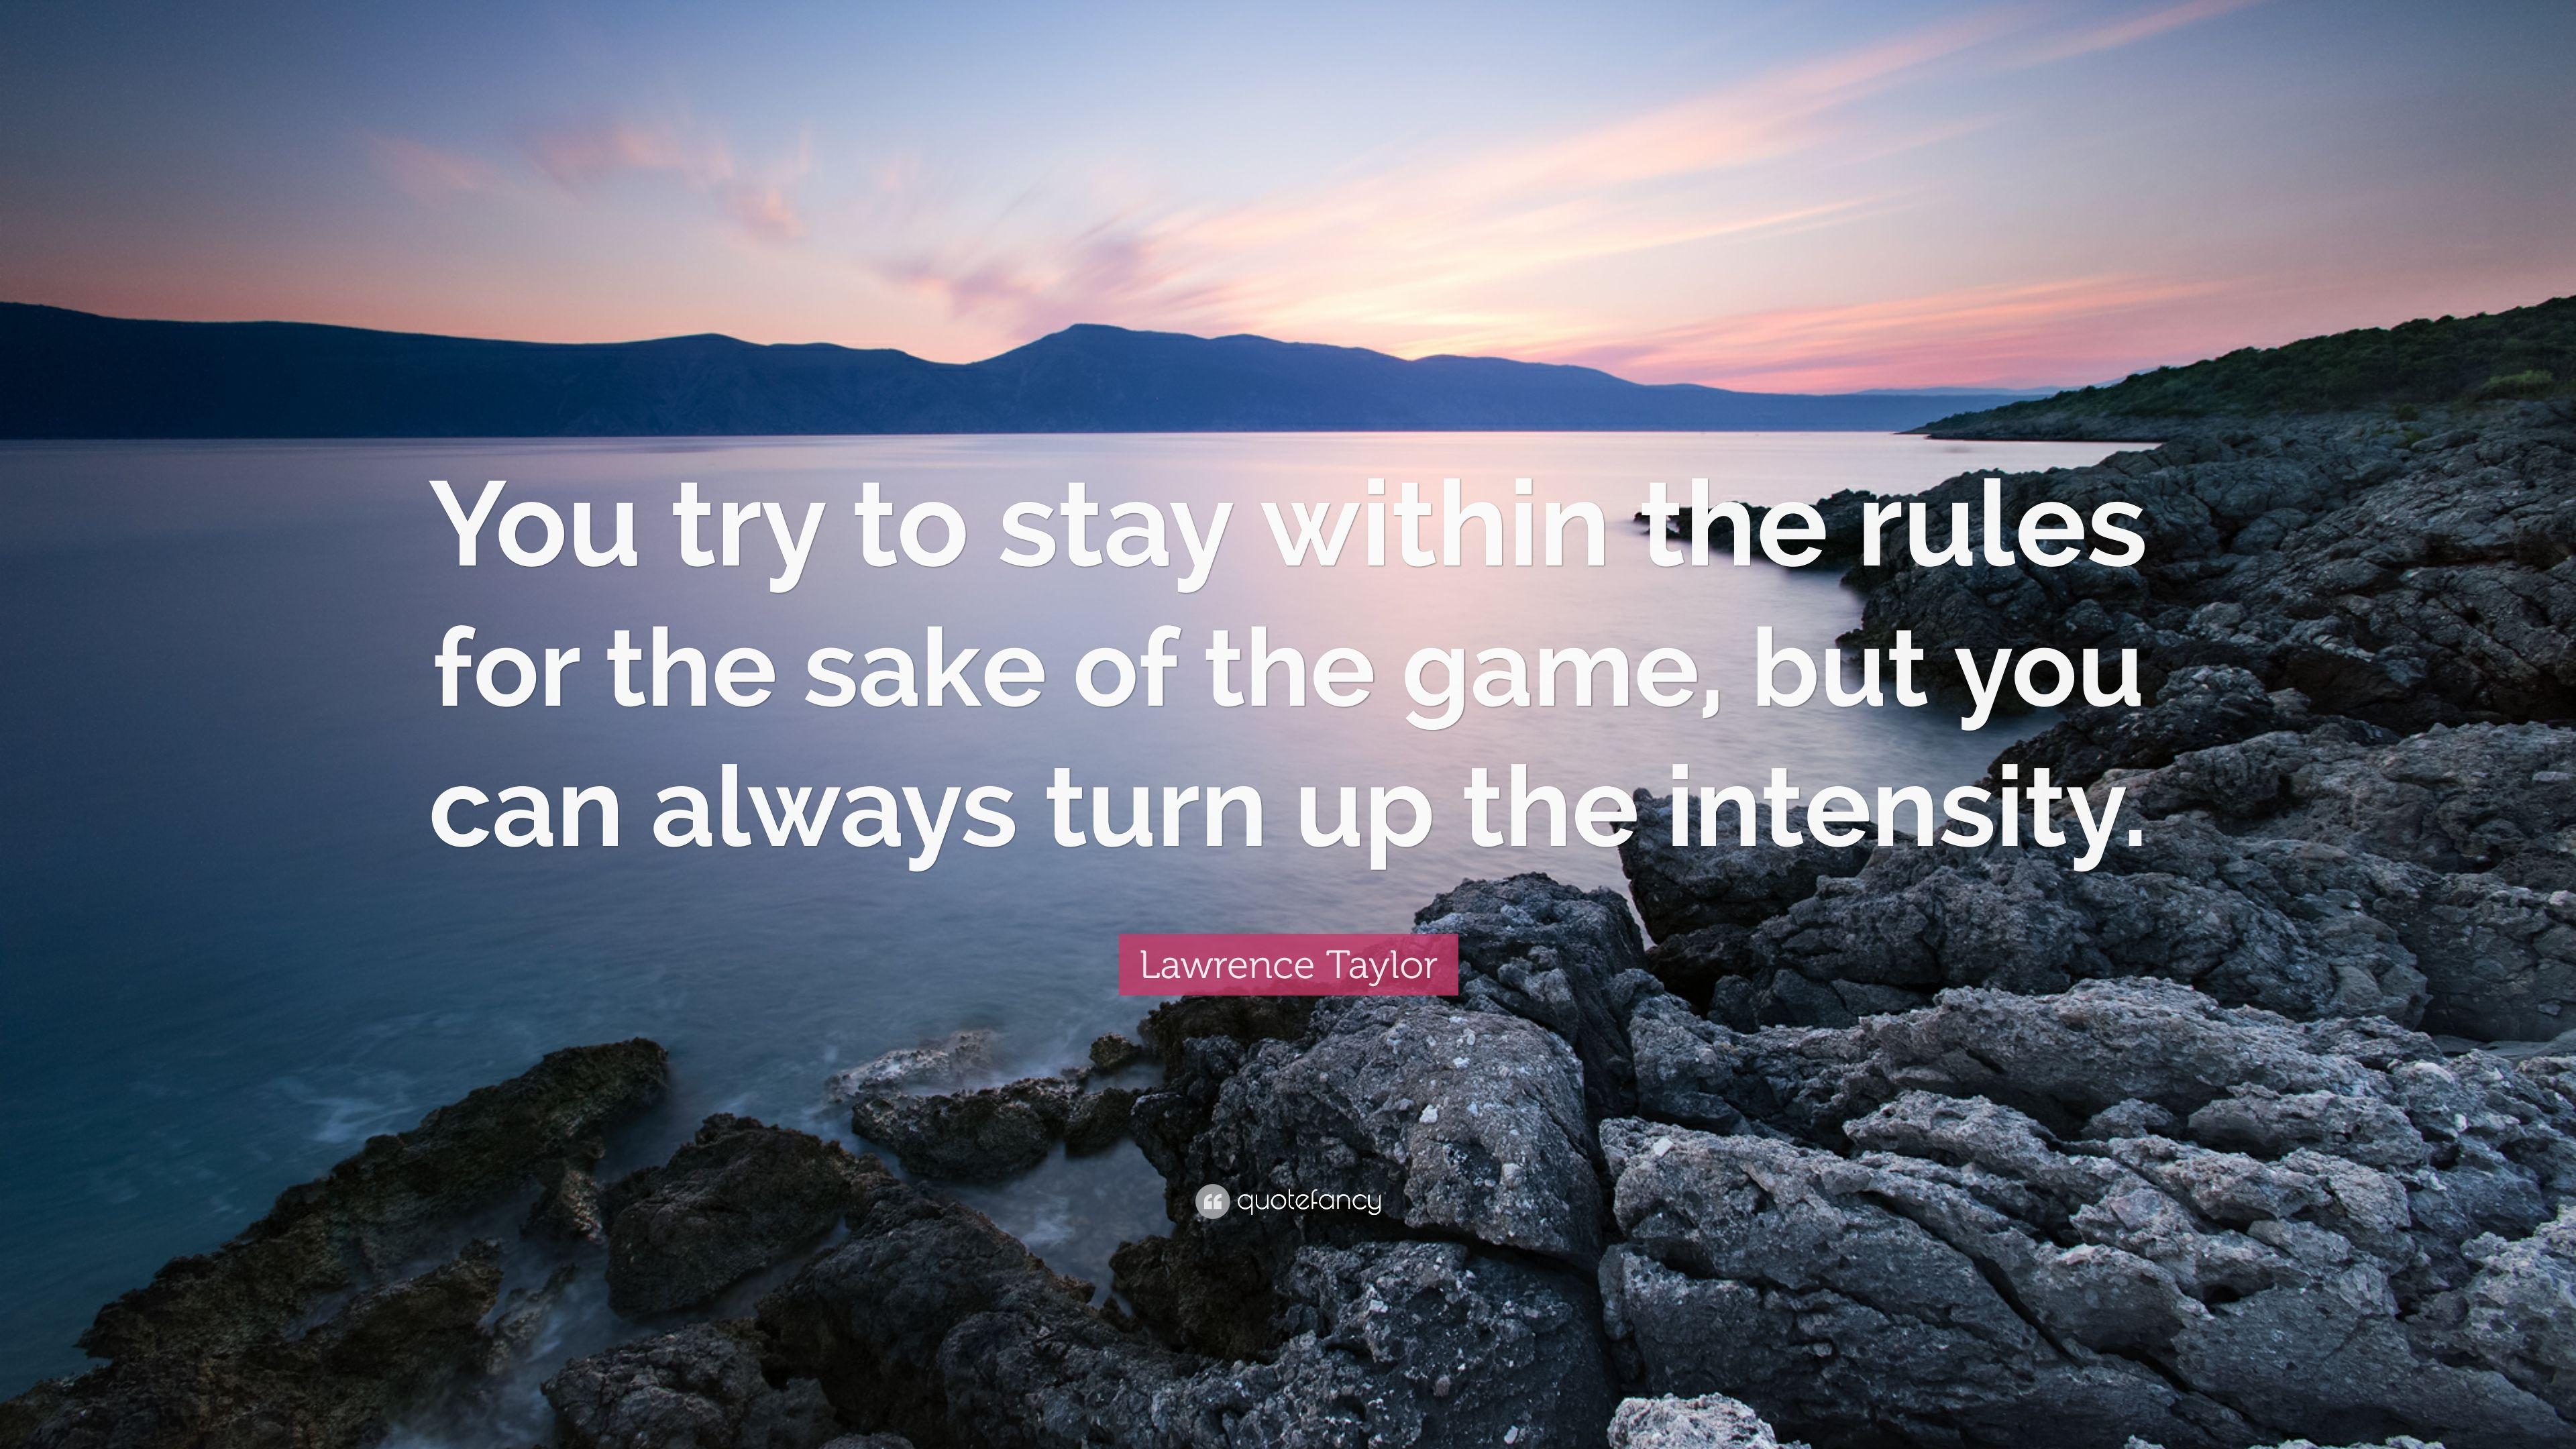 Lawrence Taylor Quote: “You try to stay within the rules for